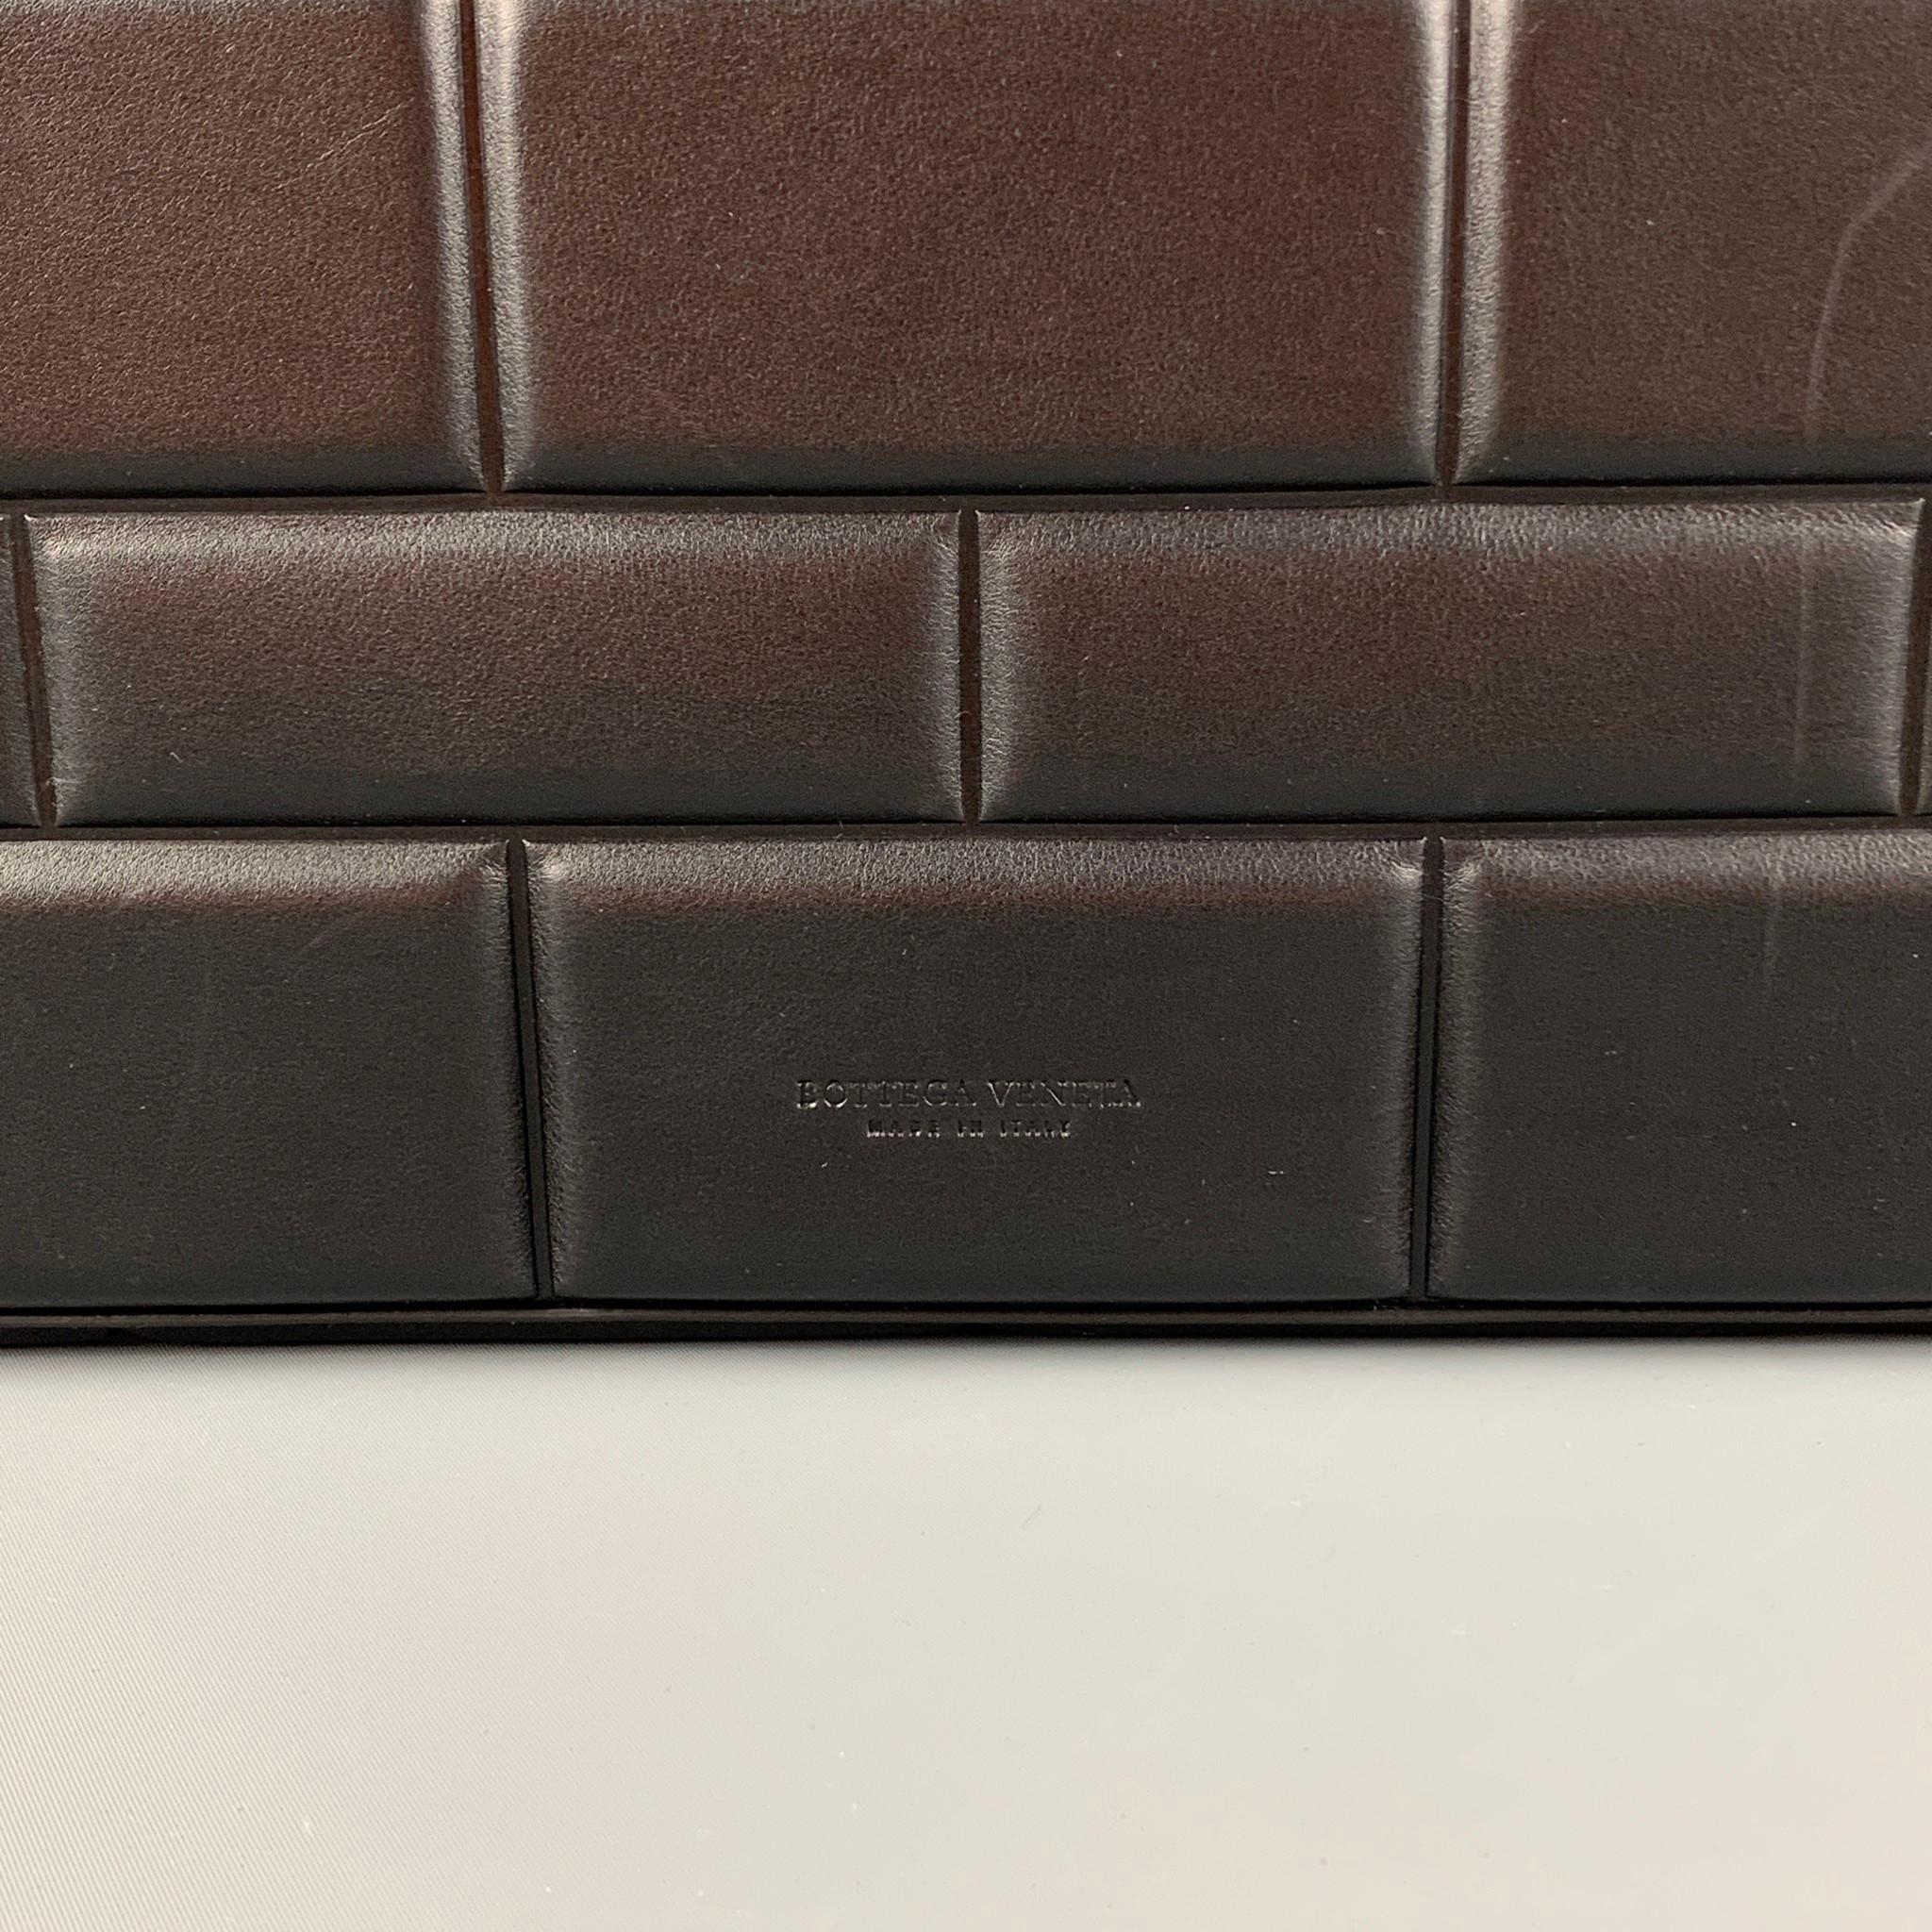 BOTTEGA VENETA laptop case comes in a black padded leather, inner slots, and a zipper closure. Made in Italy. Includes tags.

Very Good Pre-Owned Condition. Light wear. As-is.
Marked: BD8319345D

Measurements:

Length: 14 in.
Width: 1 in.
Height: